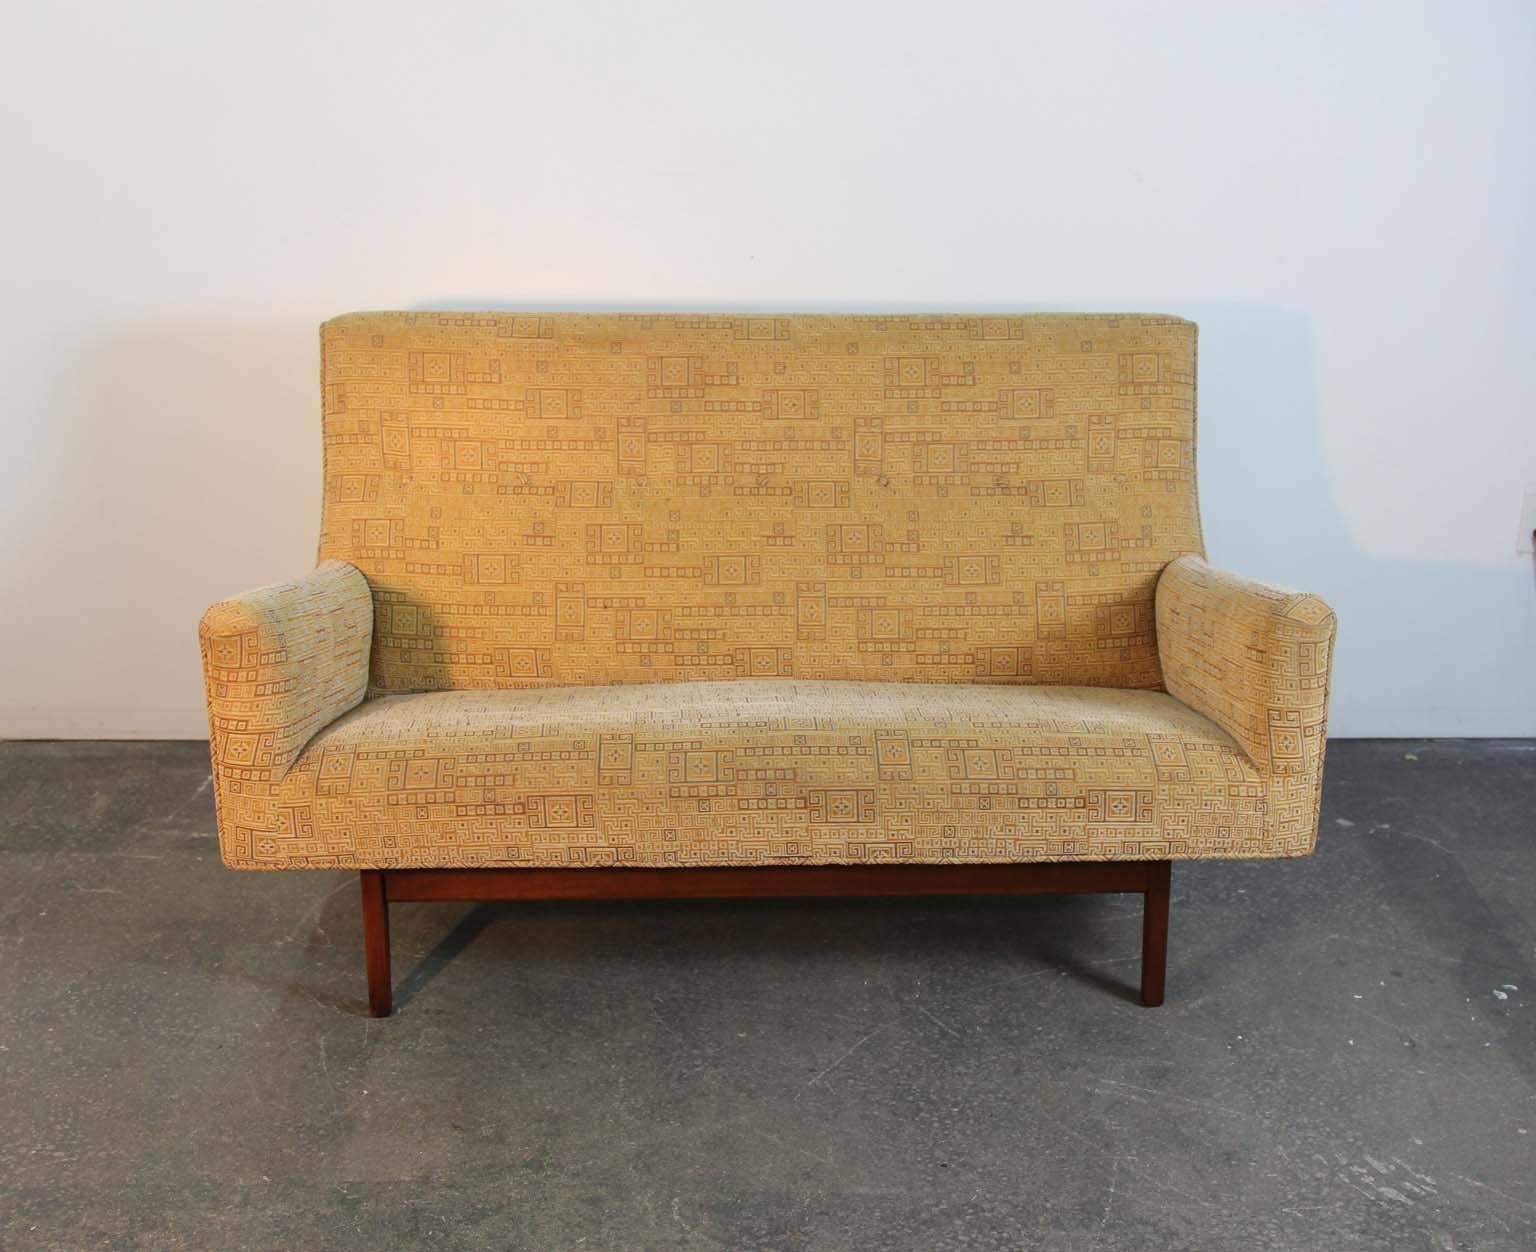 Jens Risom model U-151 two-seat settee. Original geometric fabric on a “floating” walnut base, circa 1950s. Fabric on seated surfaces show minor wear and fade from use. Walnut base is sturdy and shows signs of a re-glue to rear of one legs joinery.